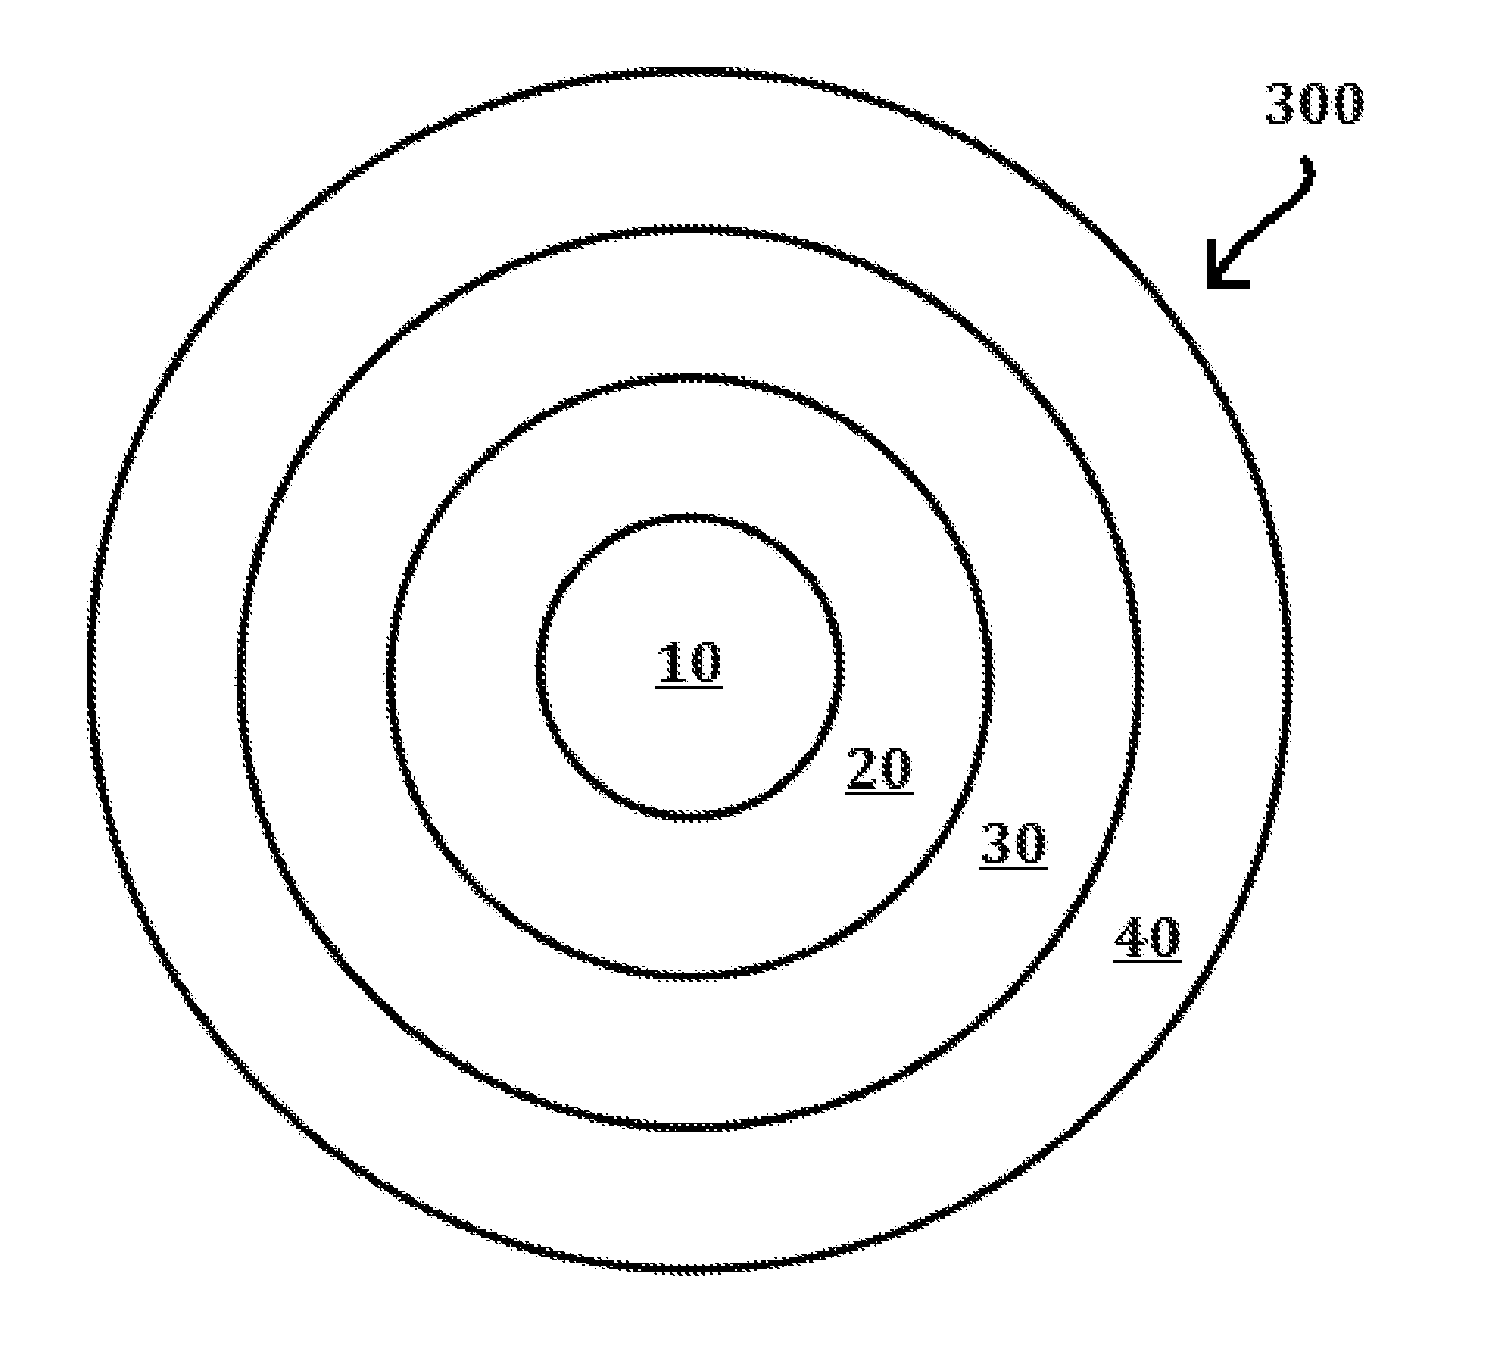 Polymer composite comprising metal based nanoparticles in a polymer matrix